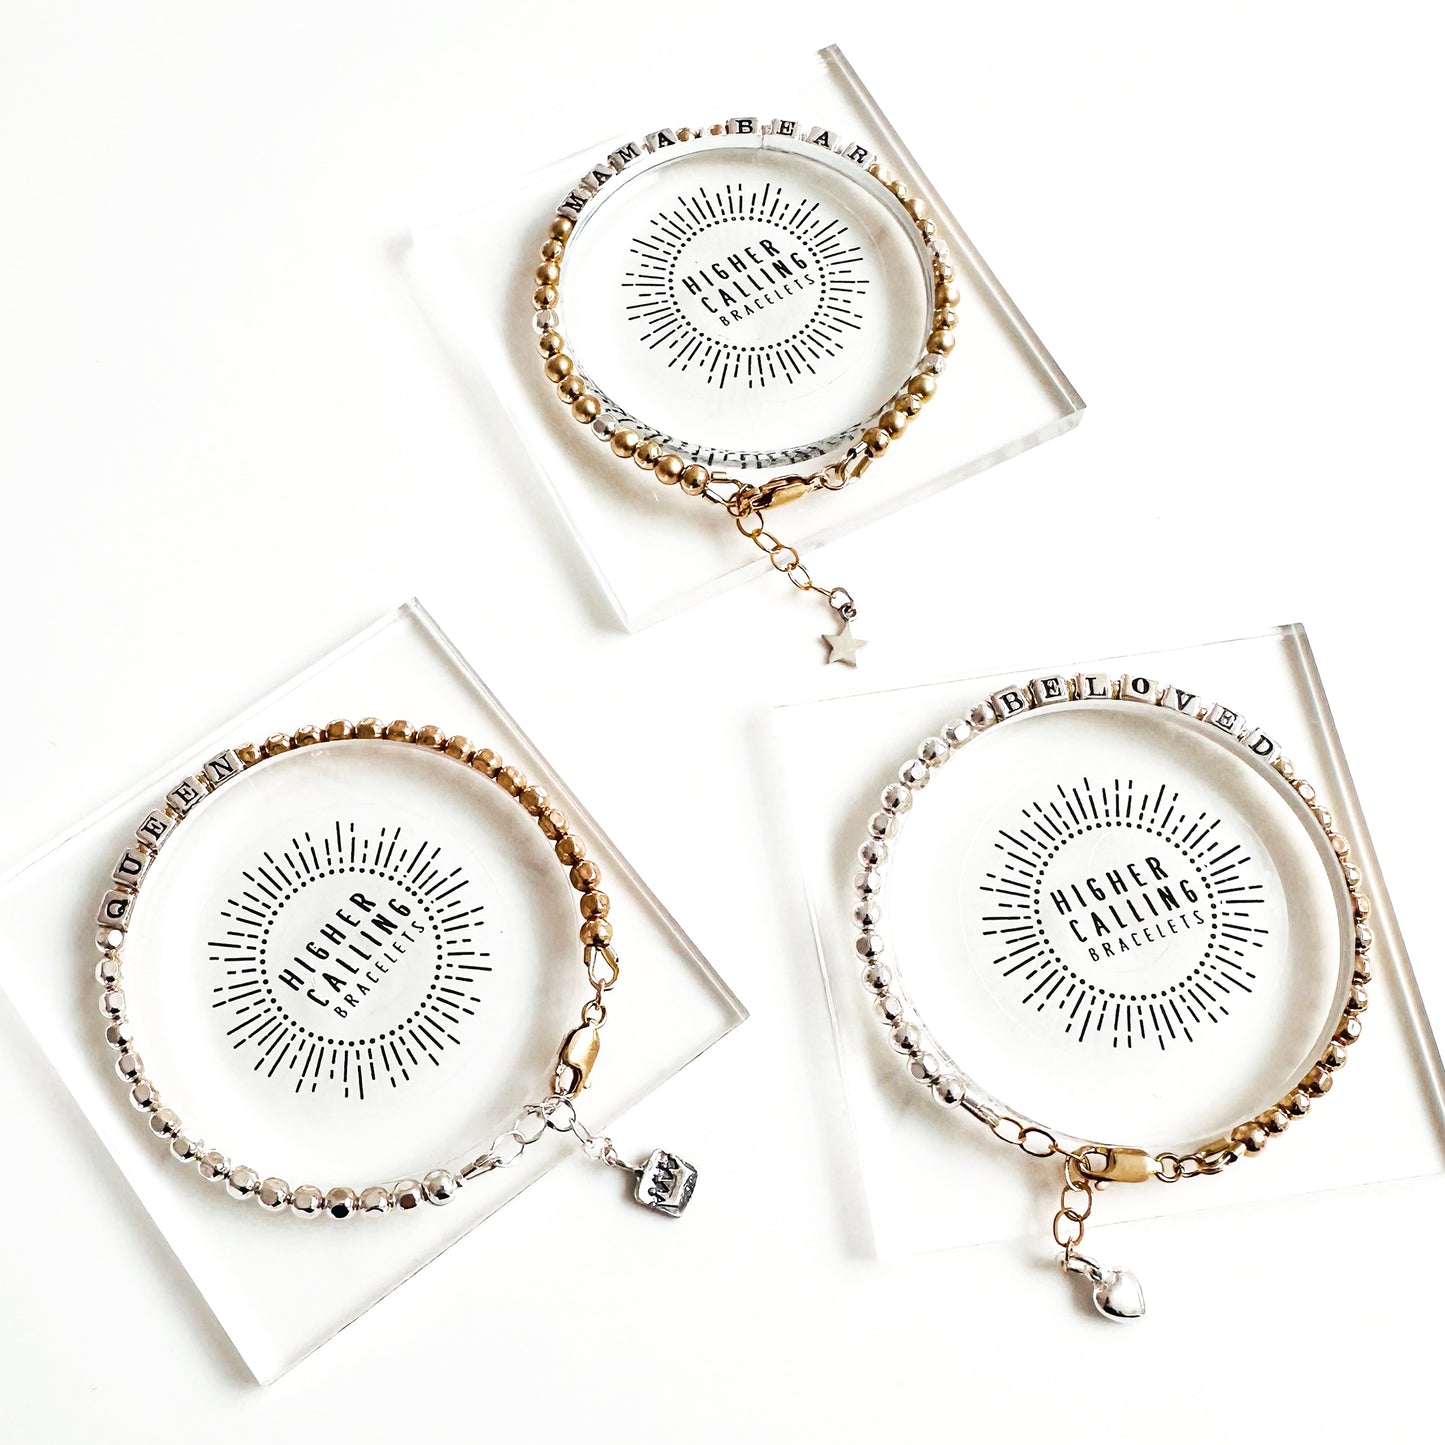 Special Mother's Day jewelry shown in gift packaging from Higher Calling Bracelets